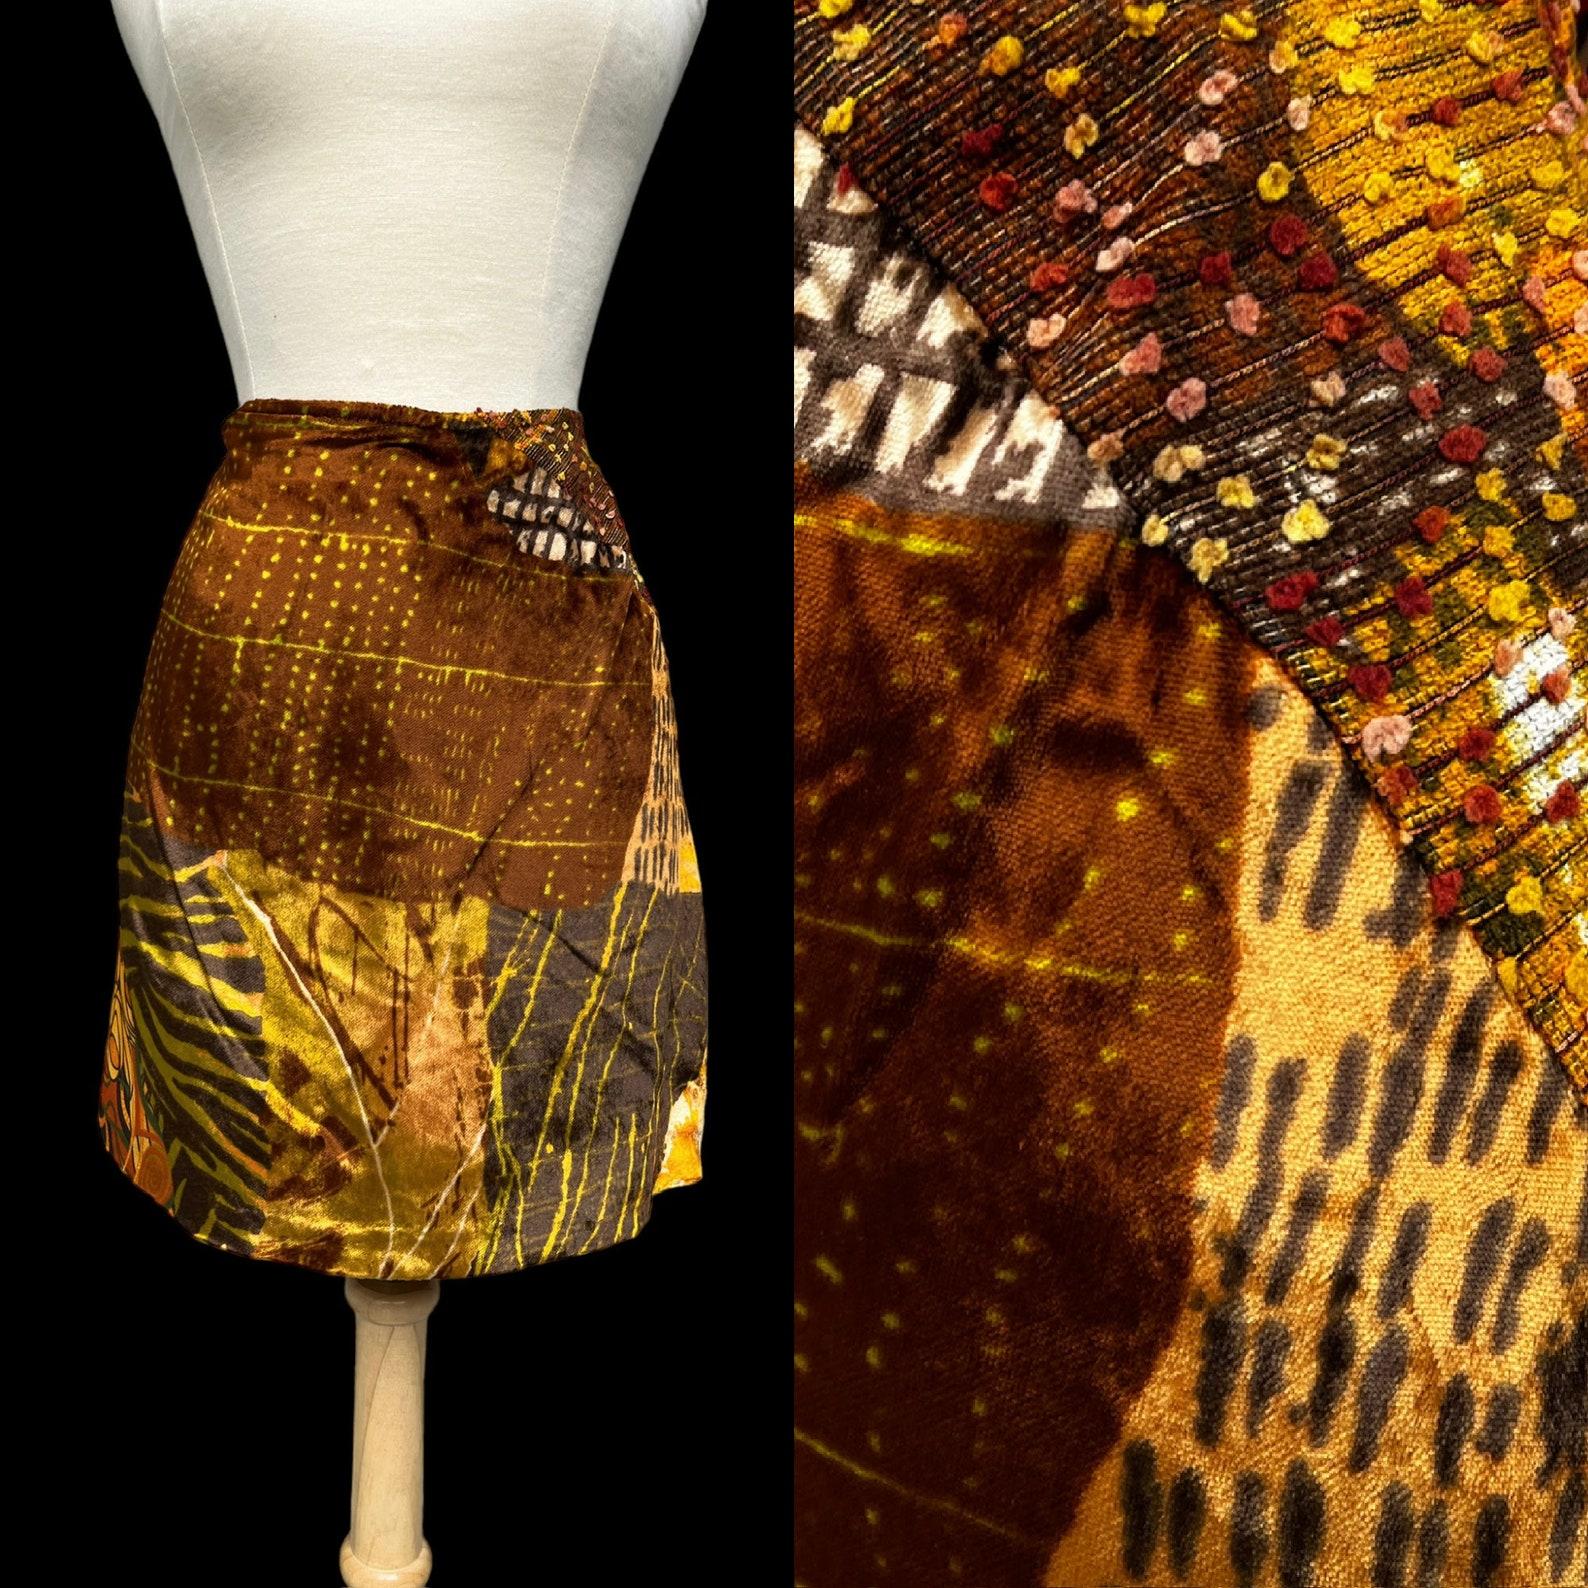 Vintage Christian Lacroix mixed media bias cut mini skirt. three panel mixed print, pattern and texture. front is velvet, side & back are a nubby knit with raised pom pom effect + smooth woven fabric. zip closure. skirt is lined. dry cleaned.

Circa